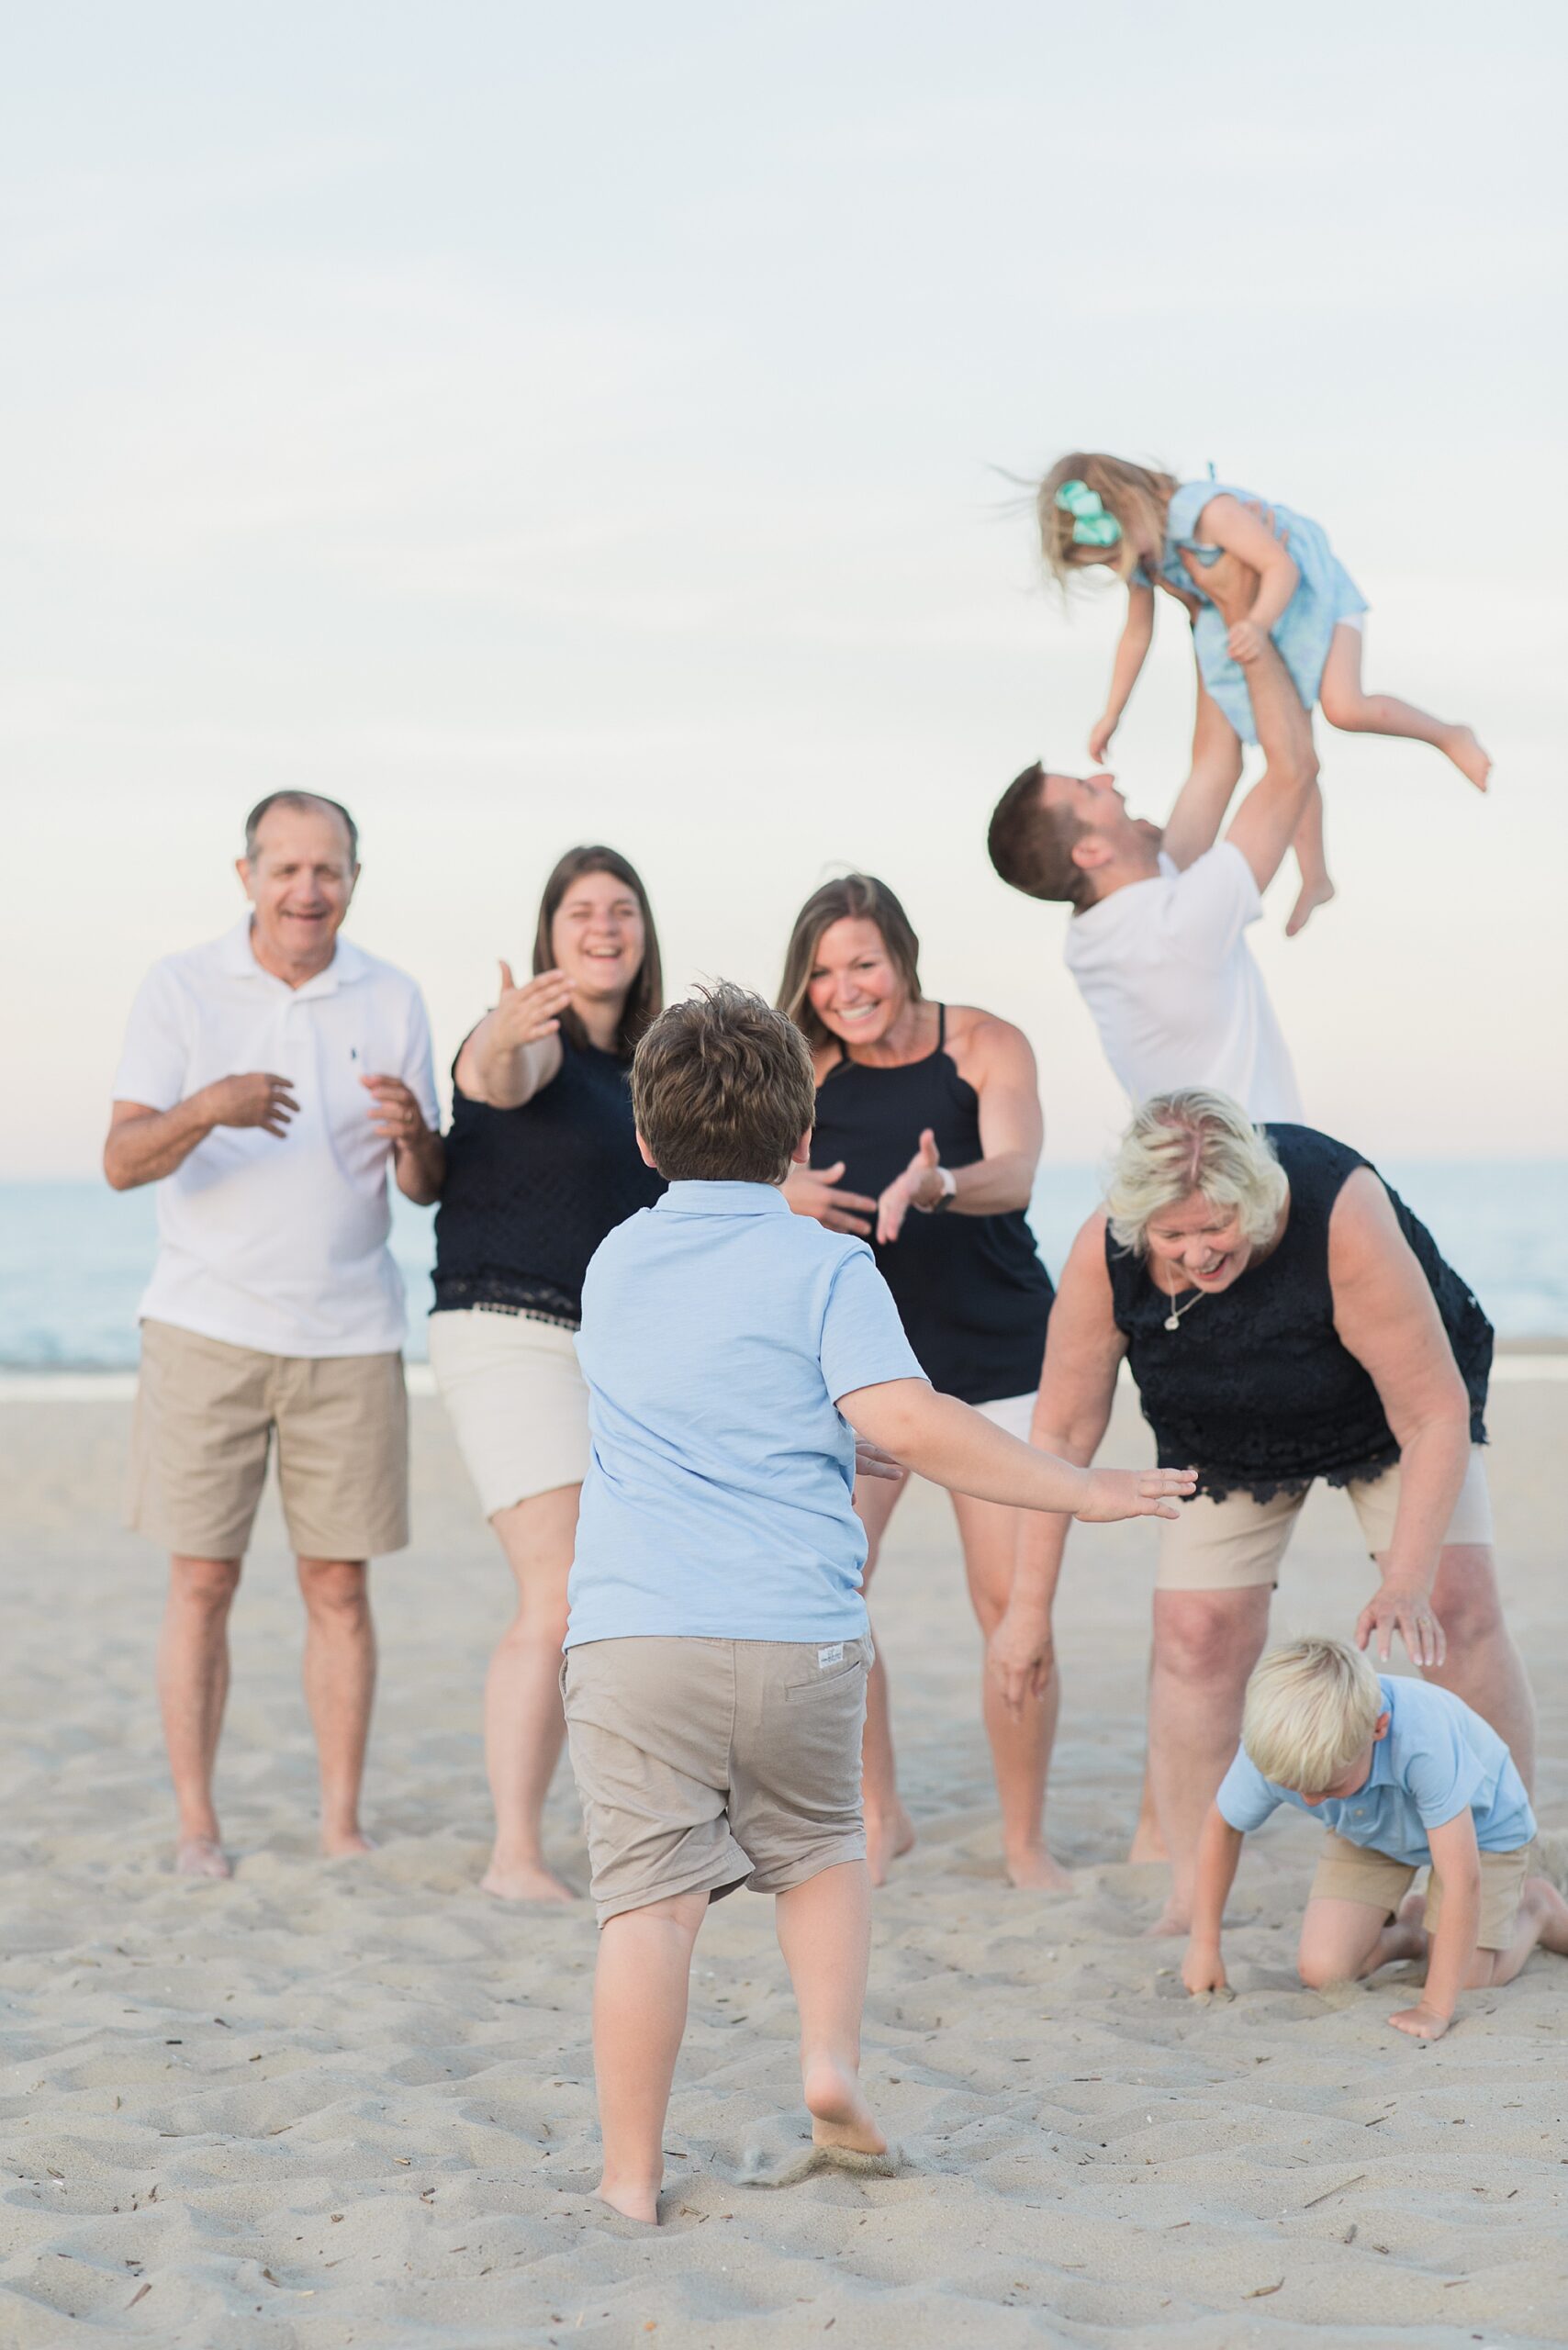 Maryland Family Photographer Christina Tundo Photography Turns 6! Celebrate with us by looking back on six business changing photo sessions.